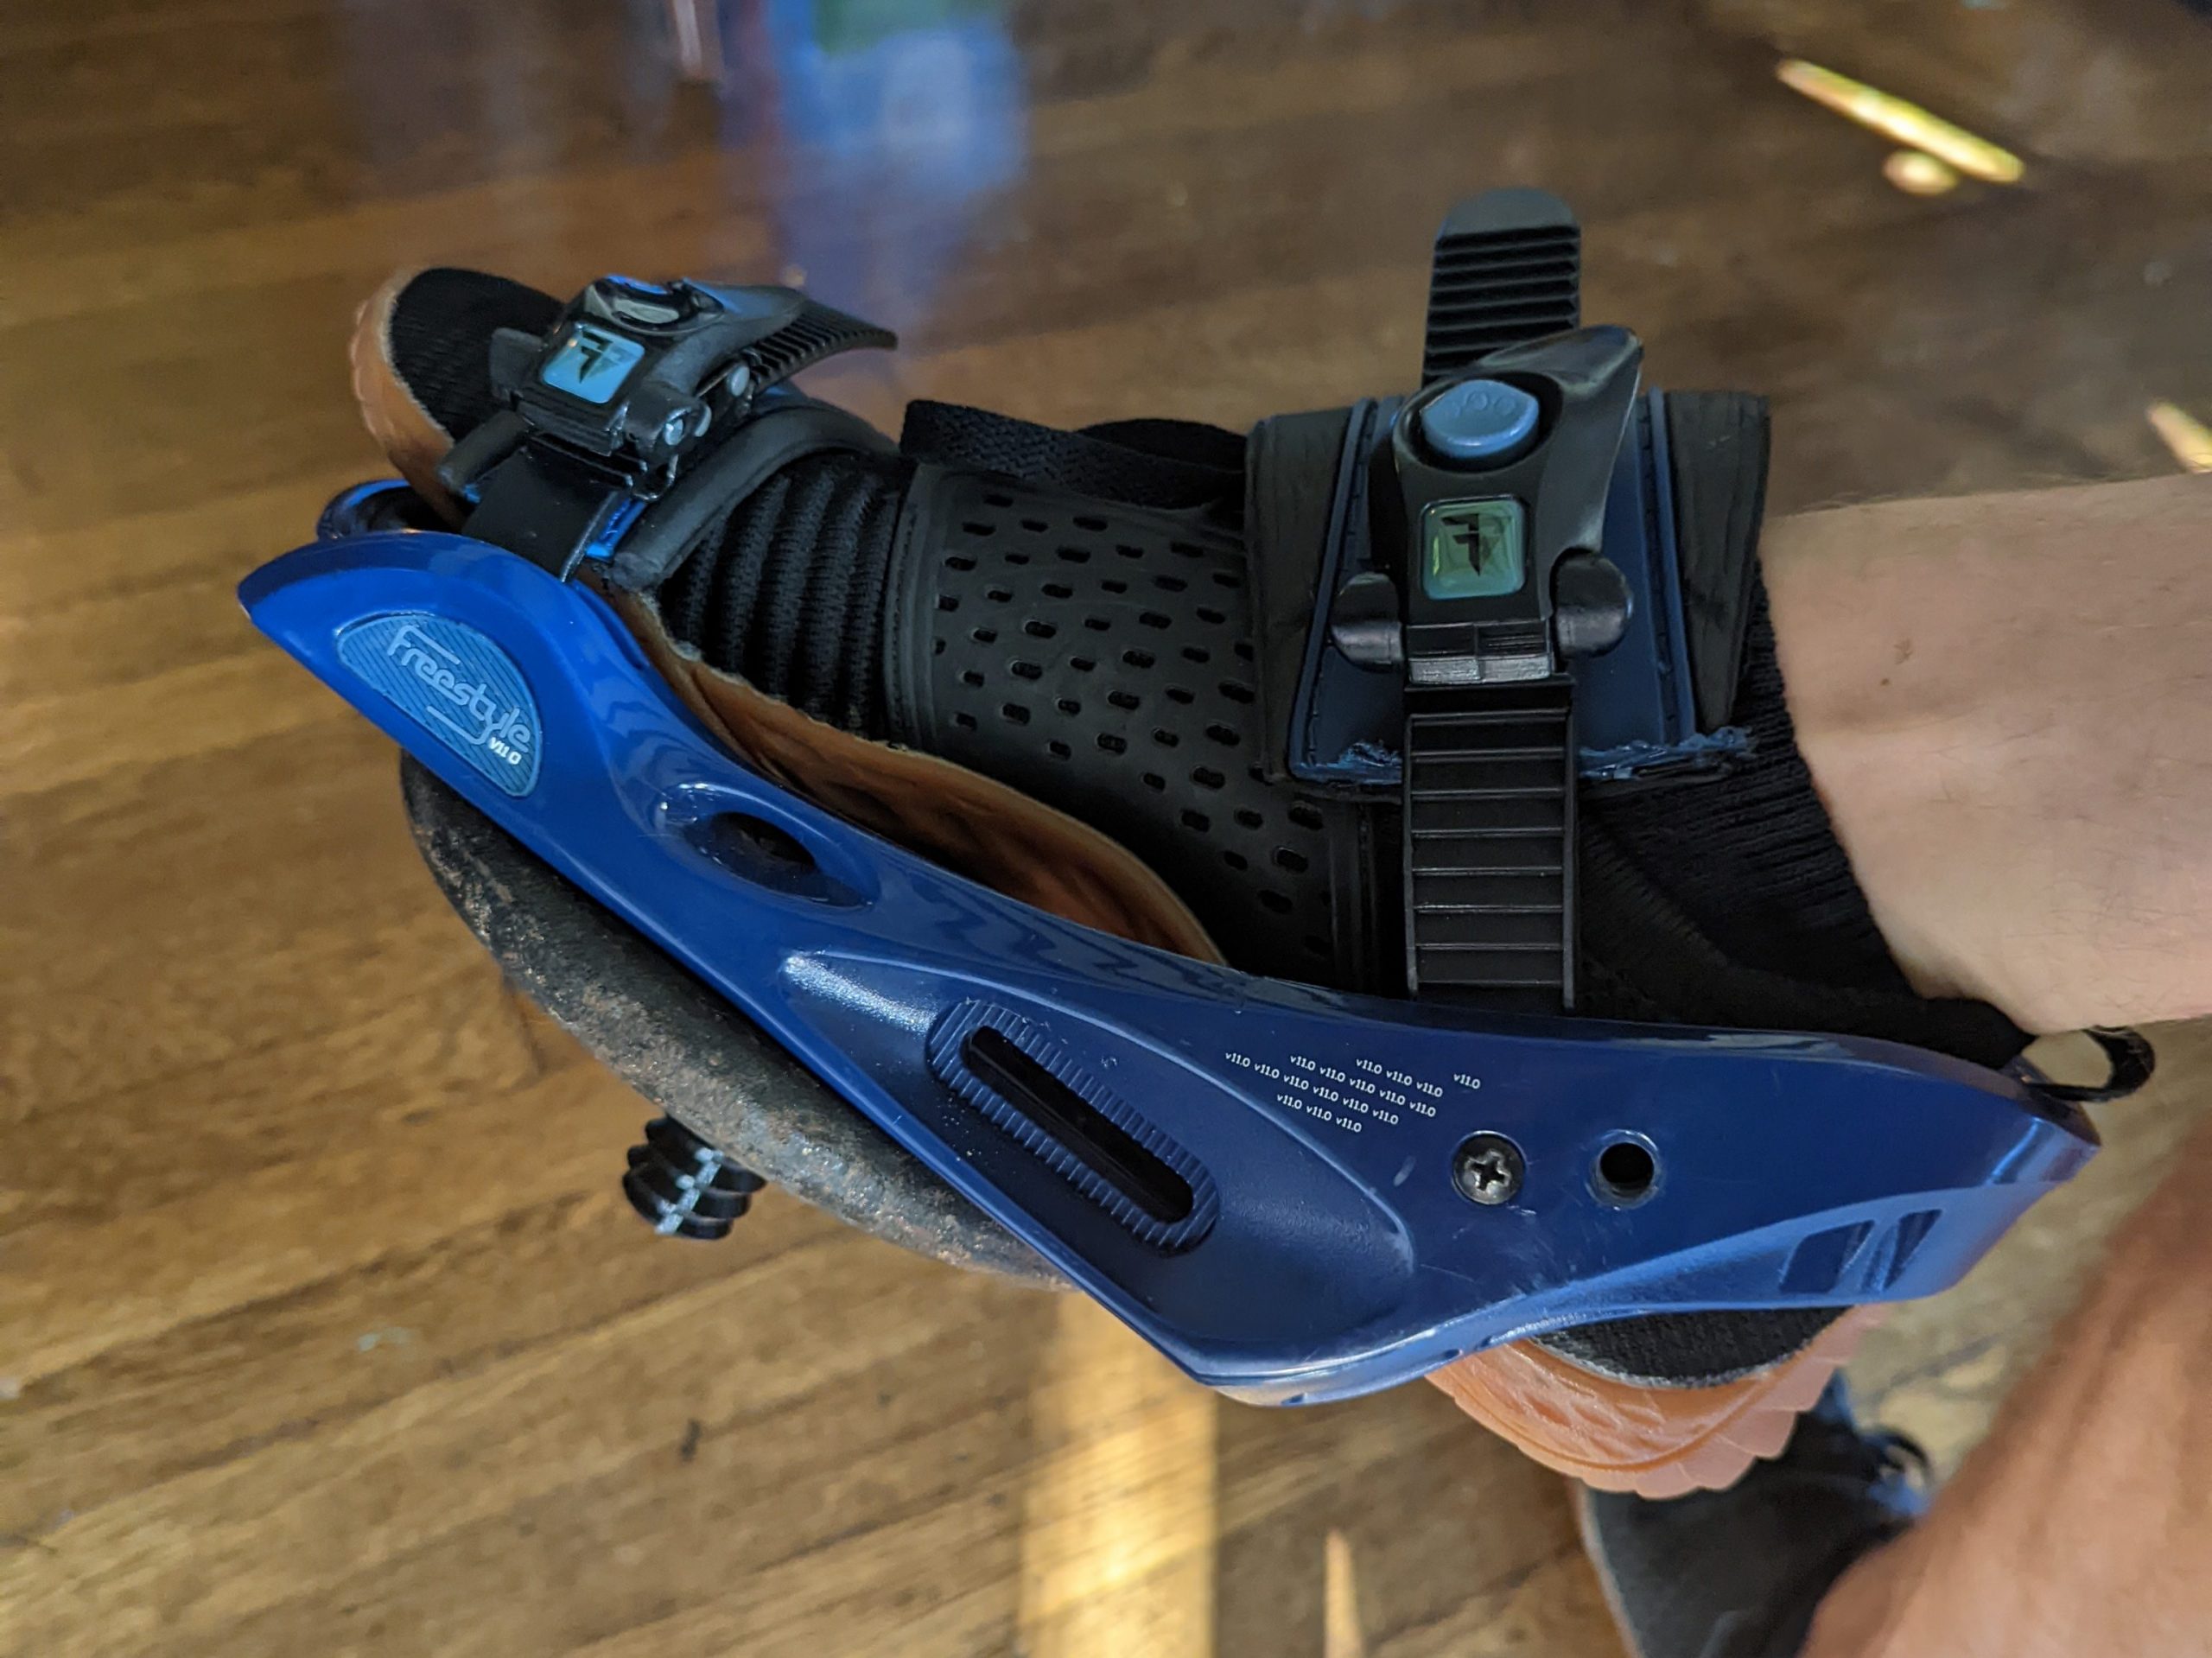 DIY 3D printed foot weights for tibialis raises and knee recovery